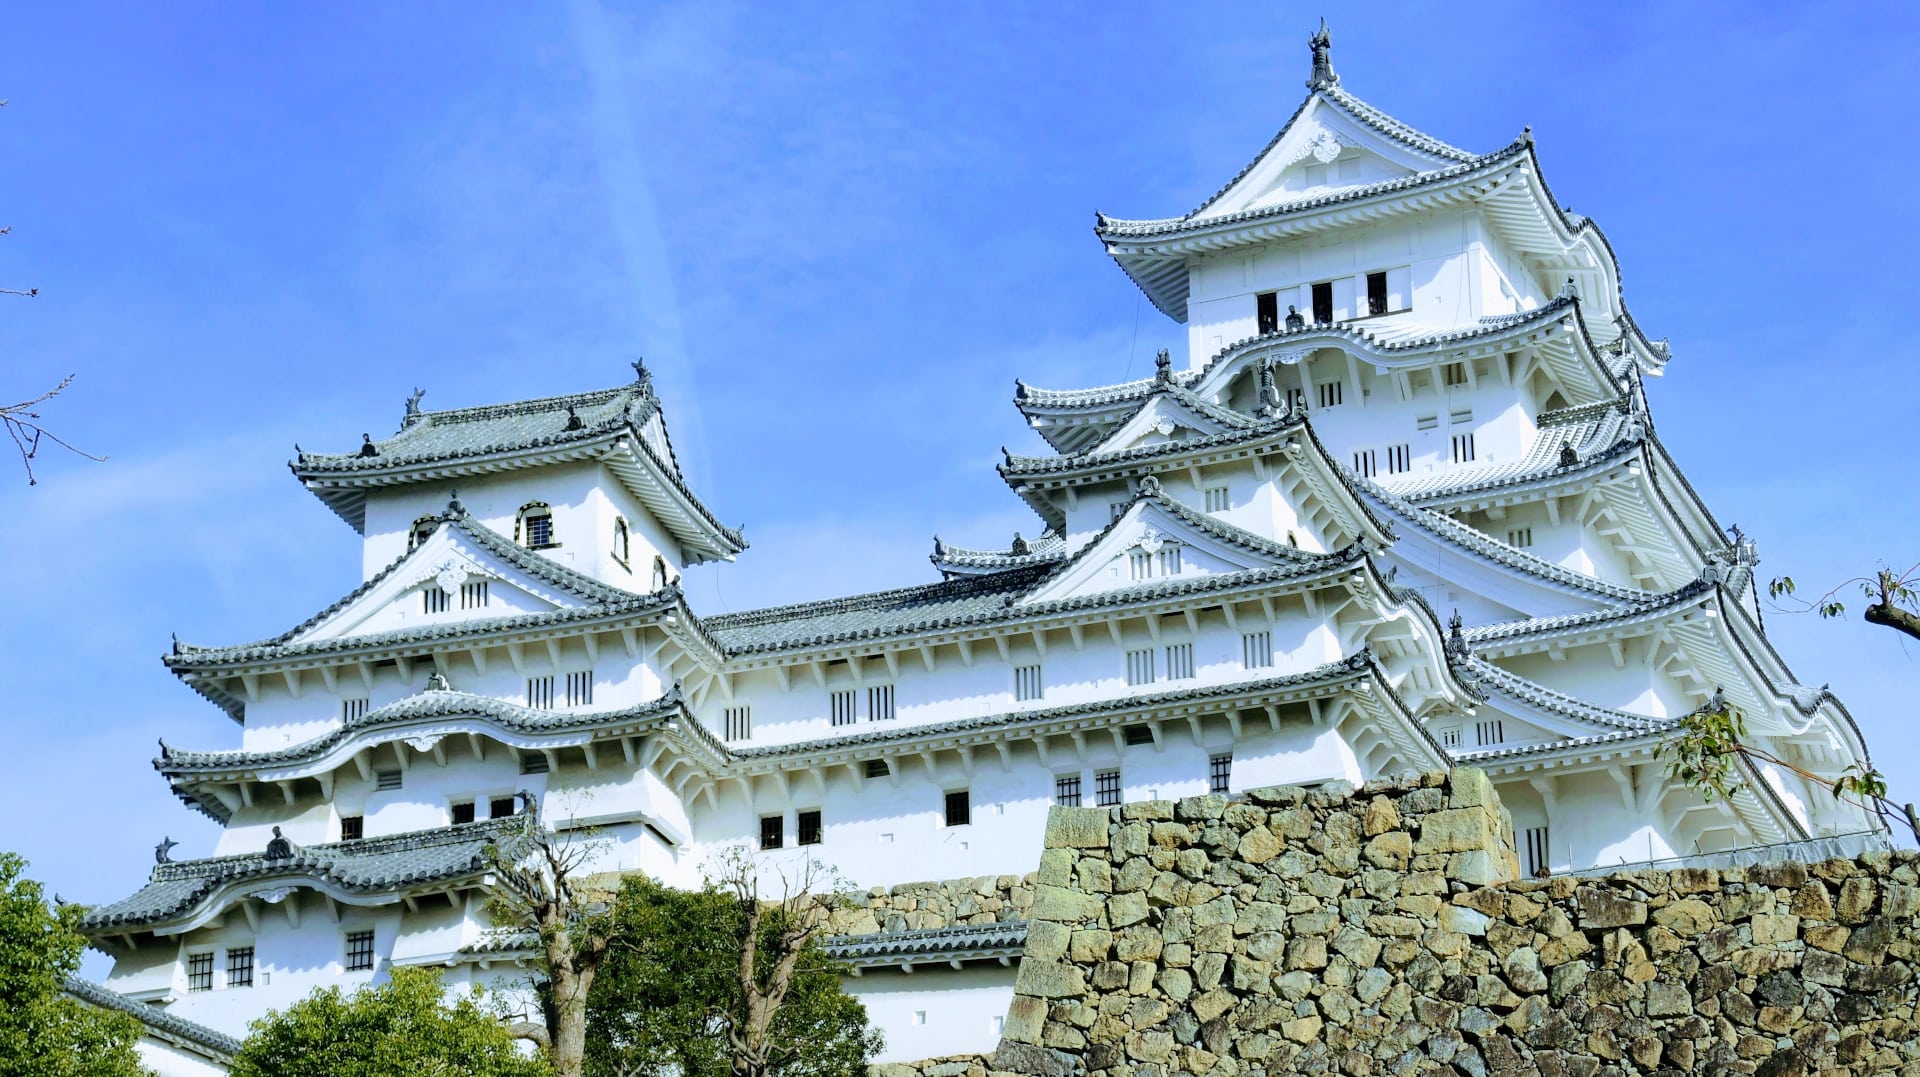 Himeji Castle Himeji City Guide featured The Real Japan